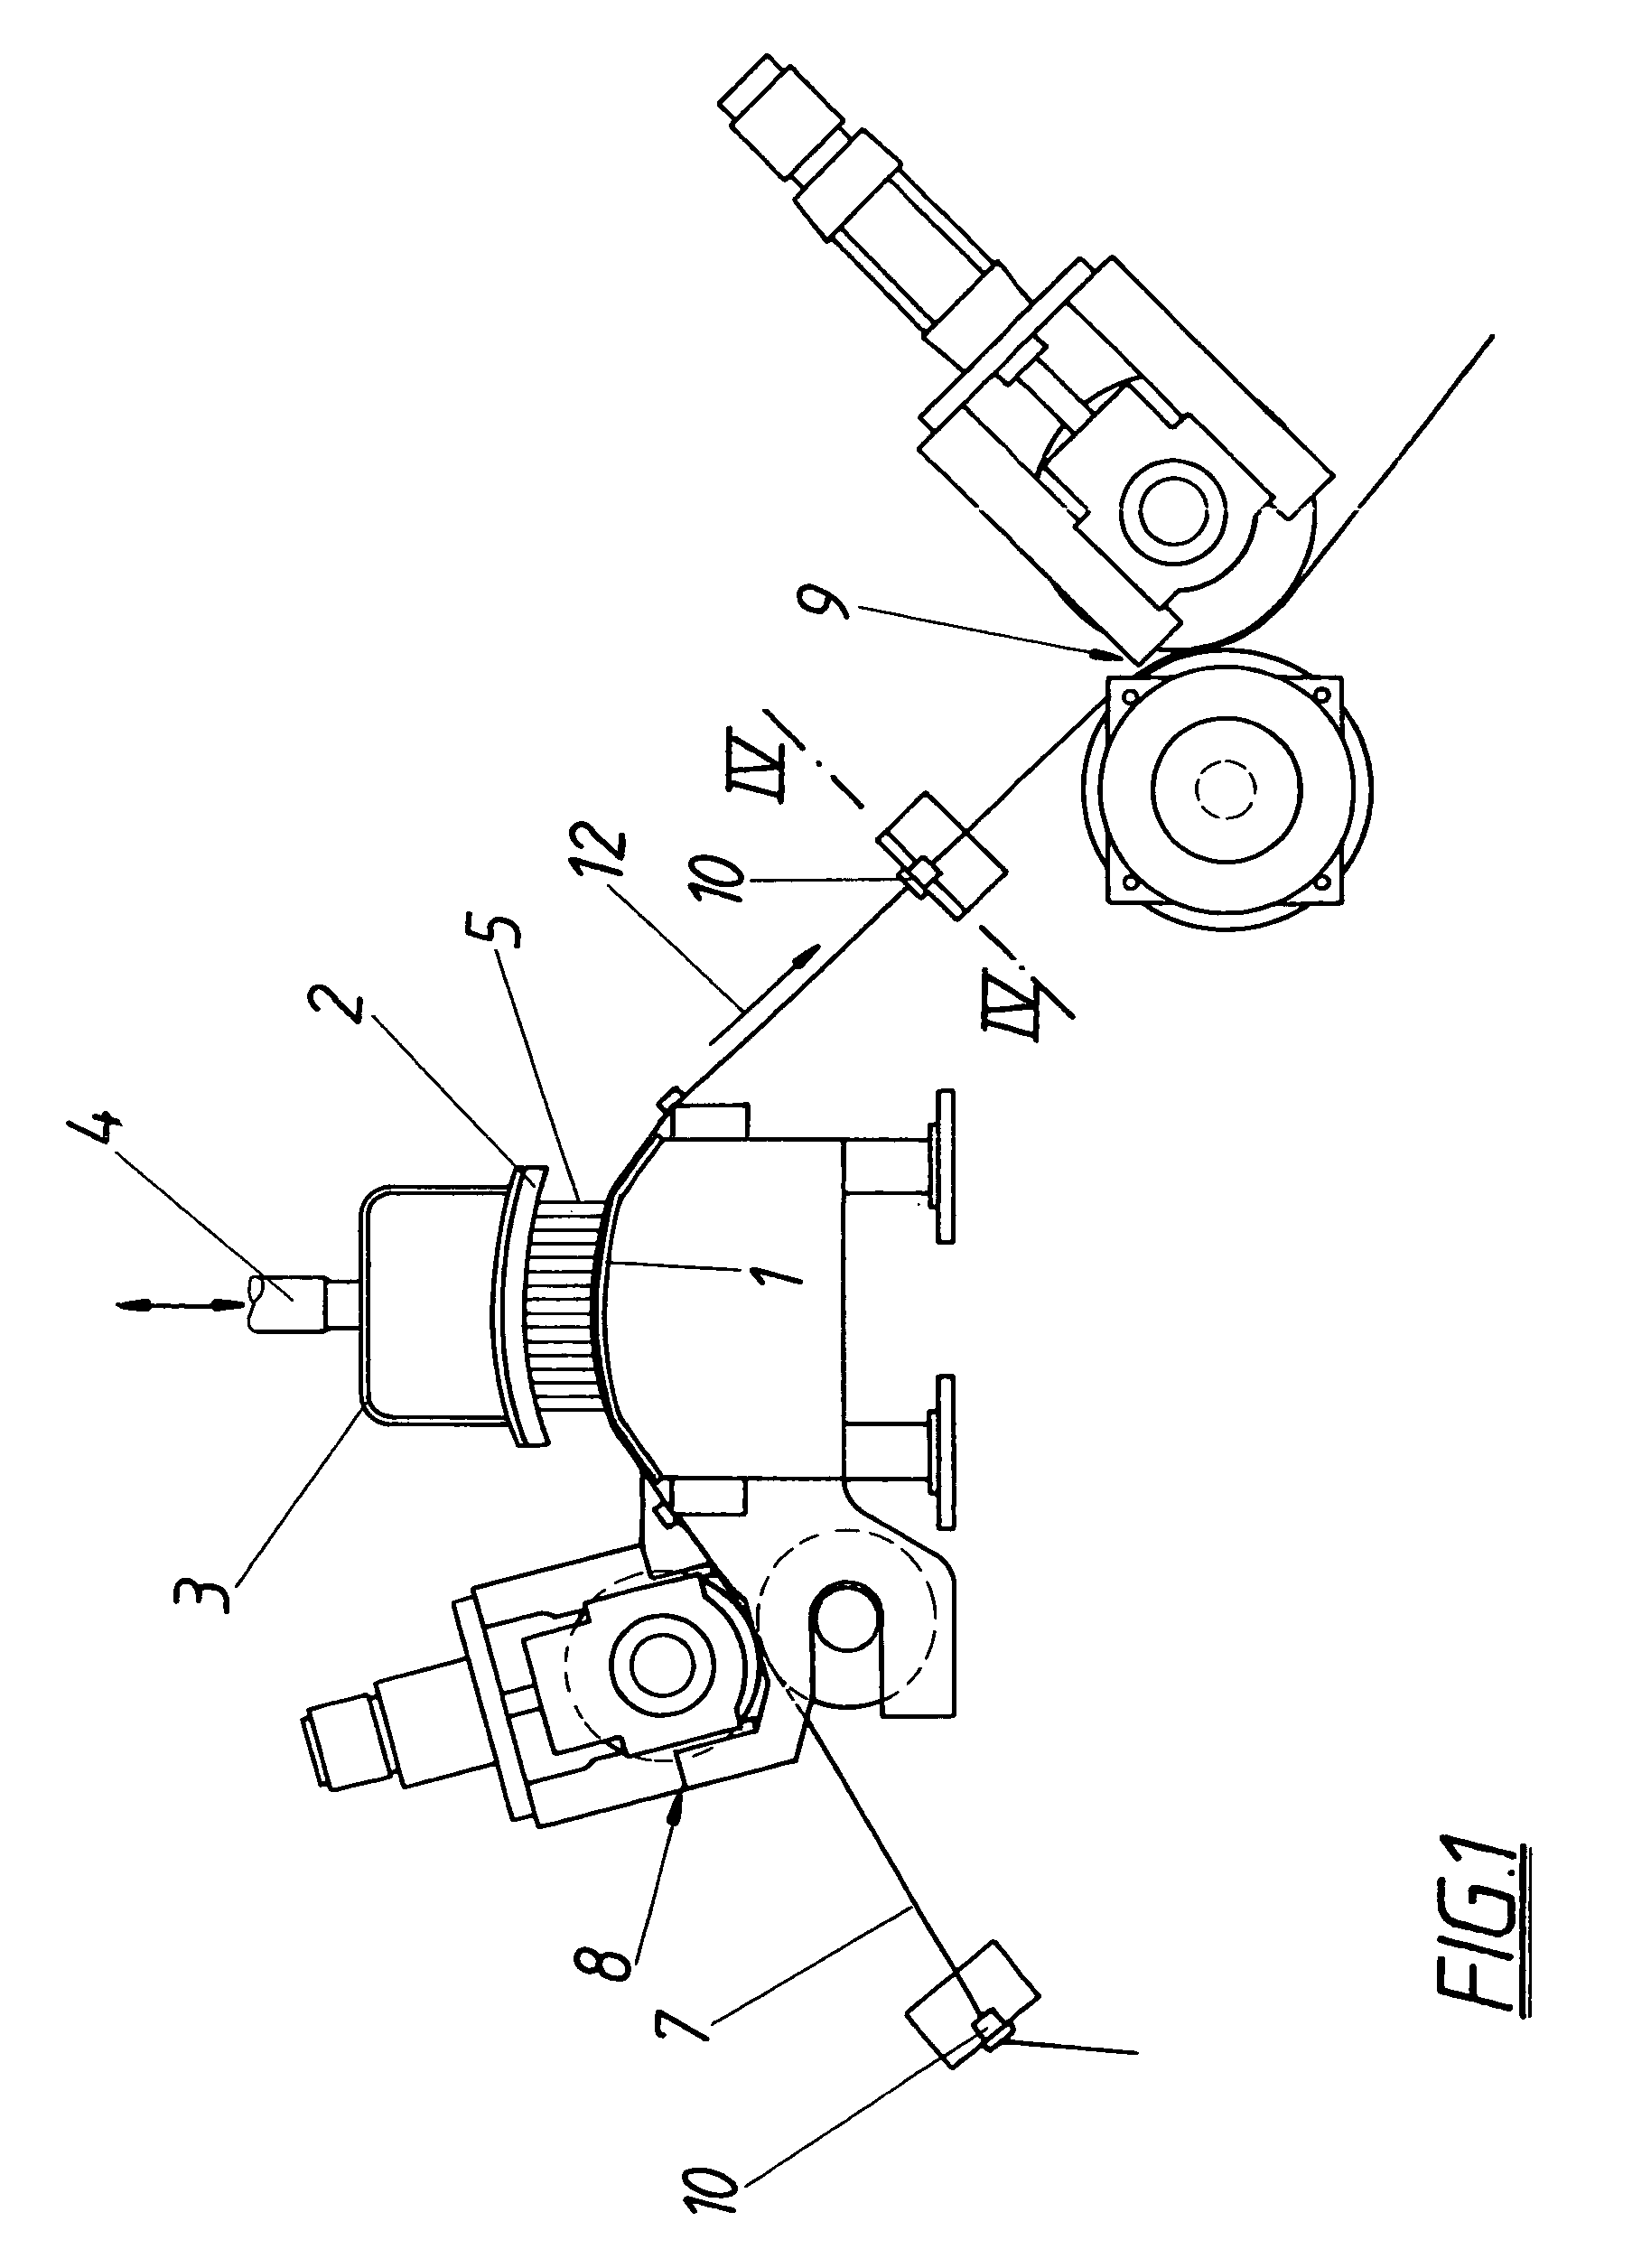 Method and apparatus for producing mop trimmings